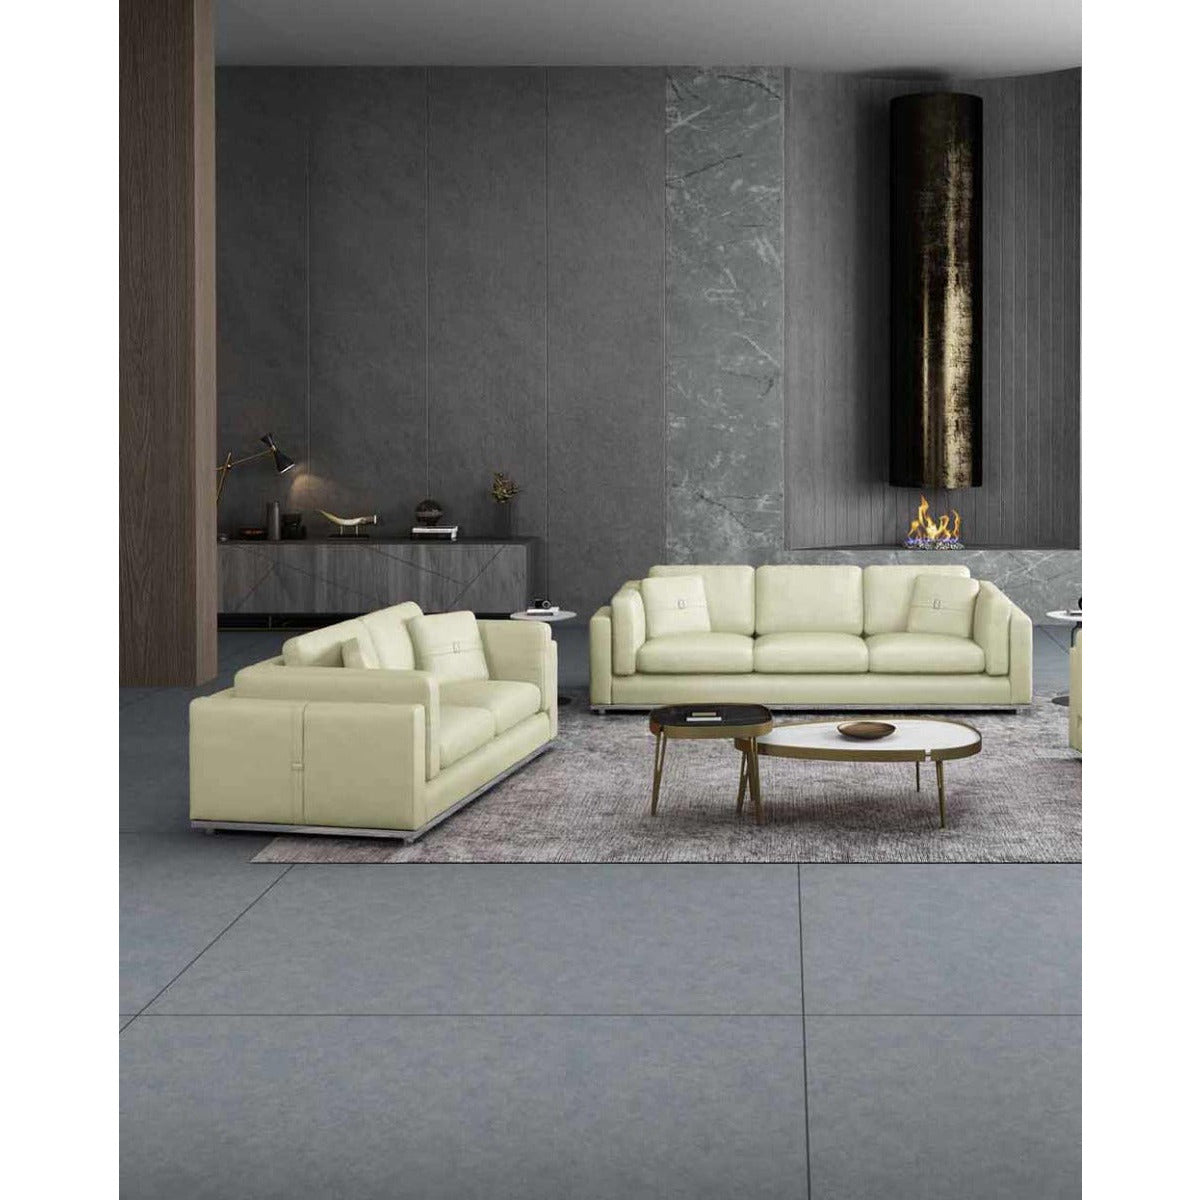 European Furniture - Picasso 2 Piece Living Room Set in Off White - 25551-2SET - New Star Living